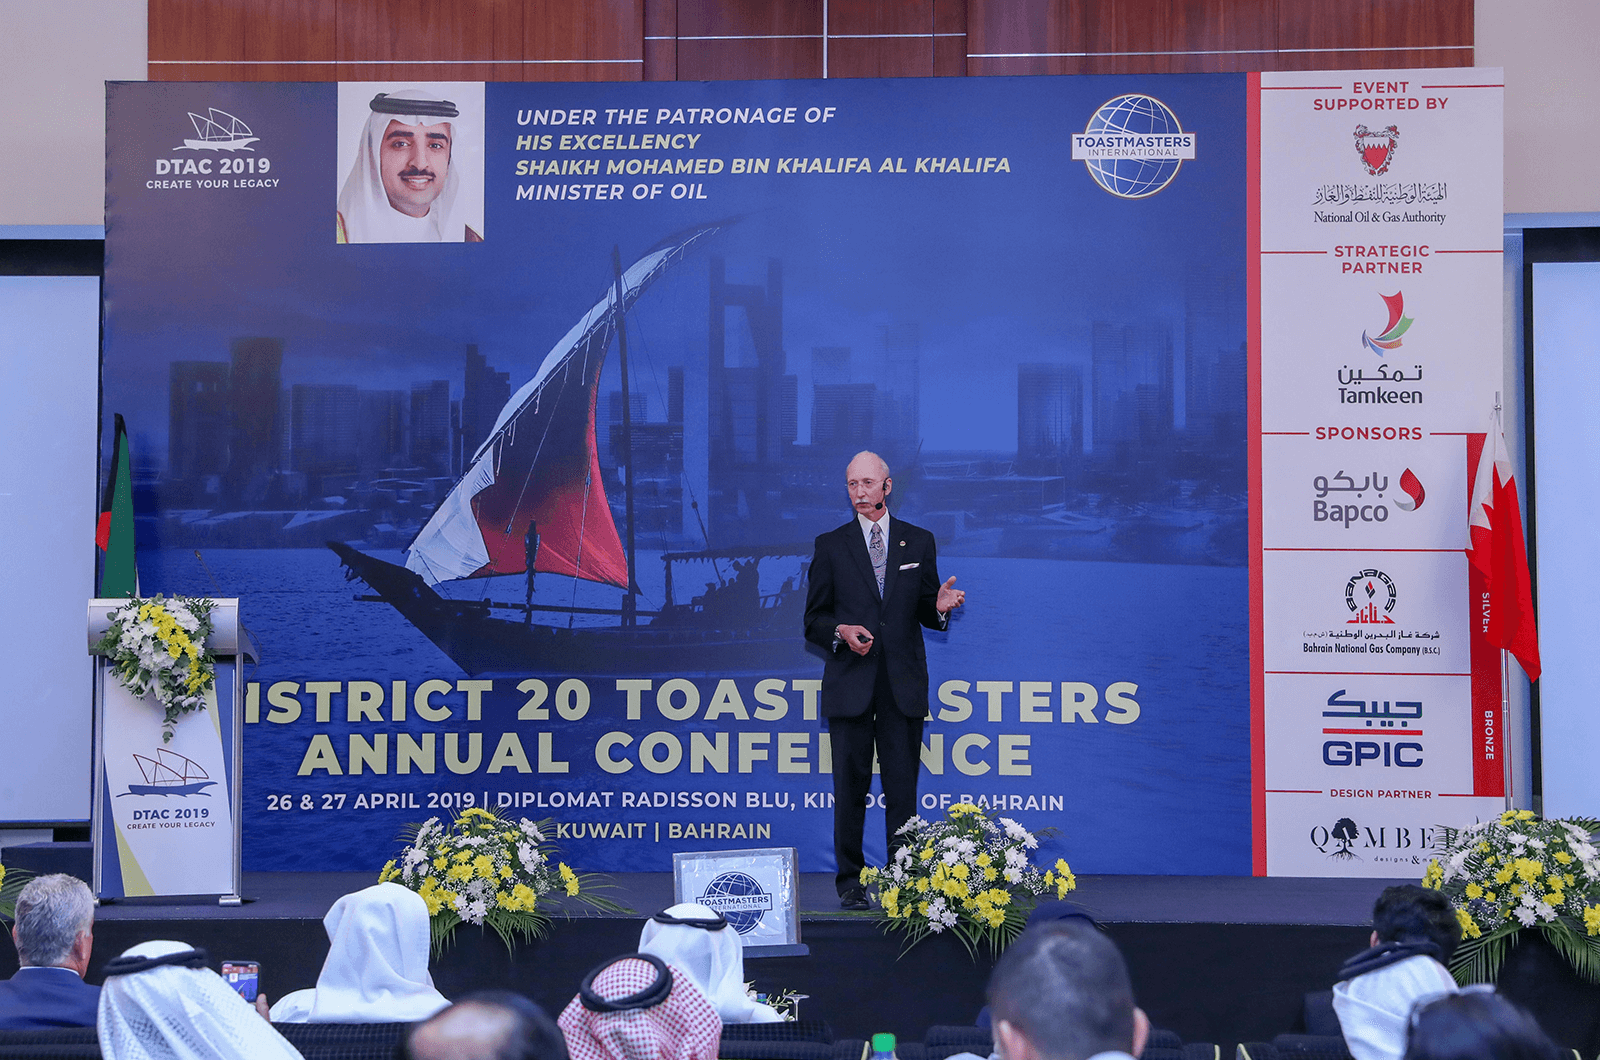 Peck speaks to members of District 20 at their annual conference in 2019.